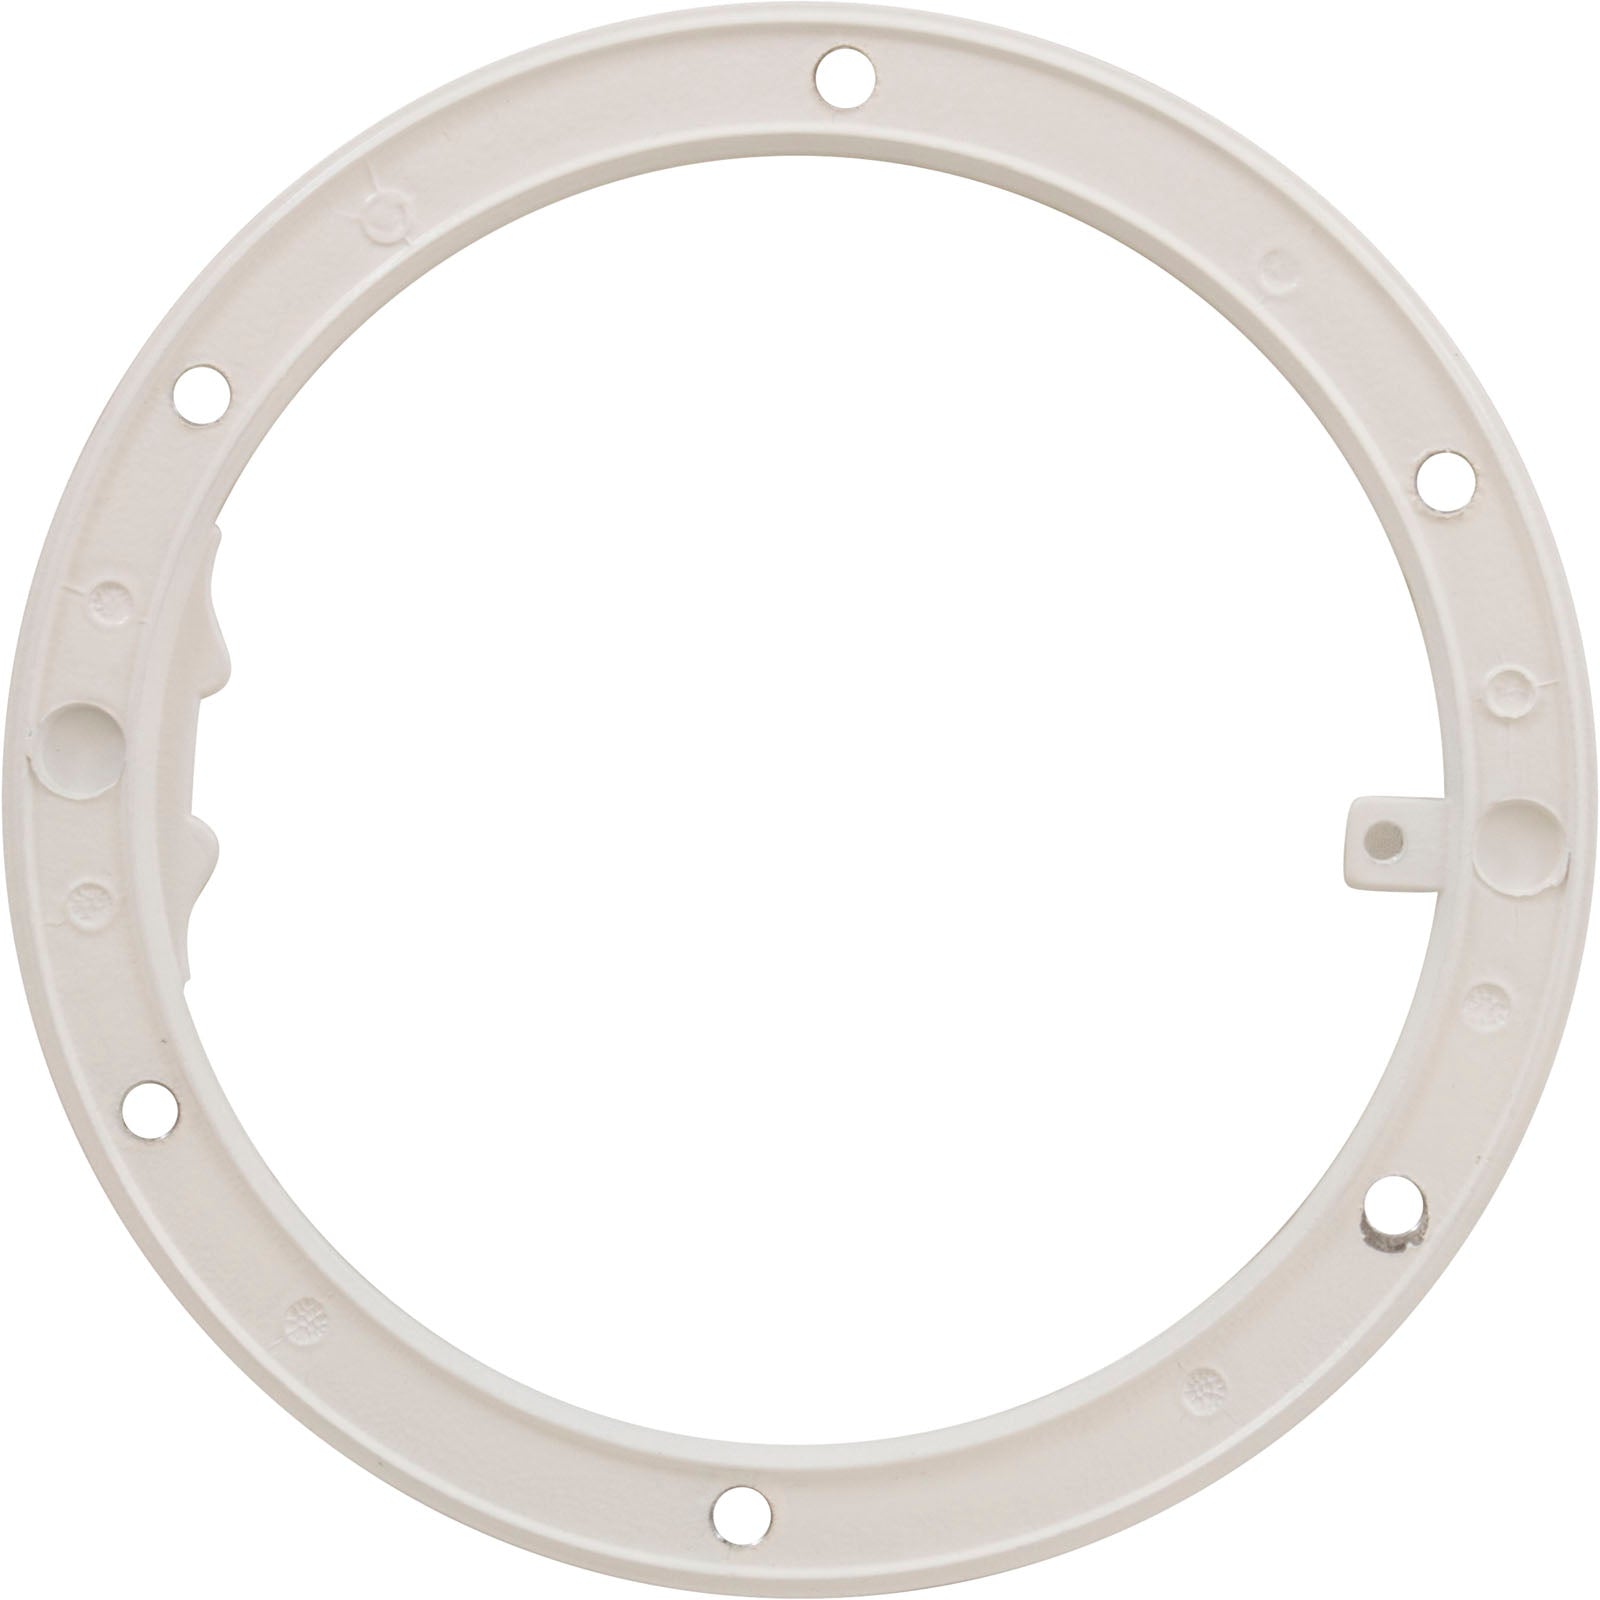 Ring Seal Spa Pwdr White Tp 79206055